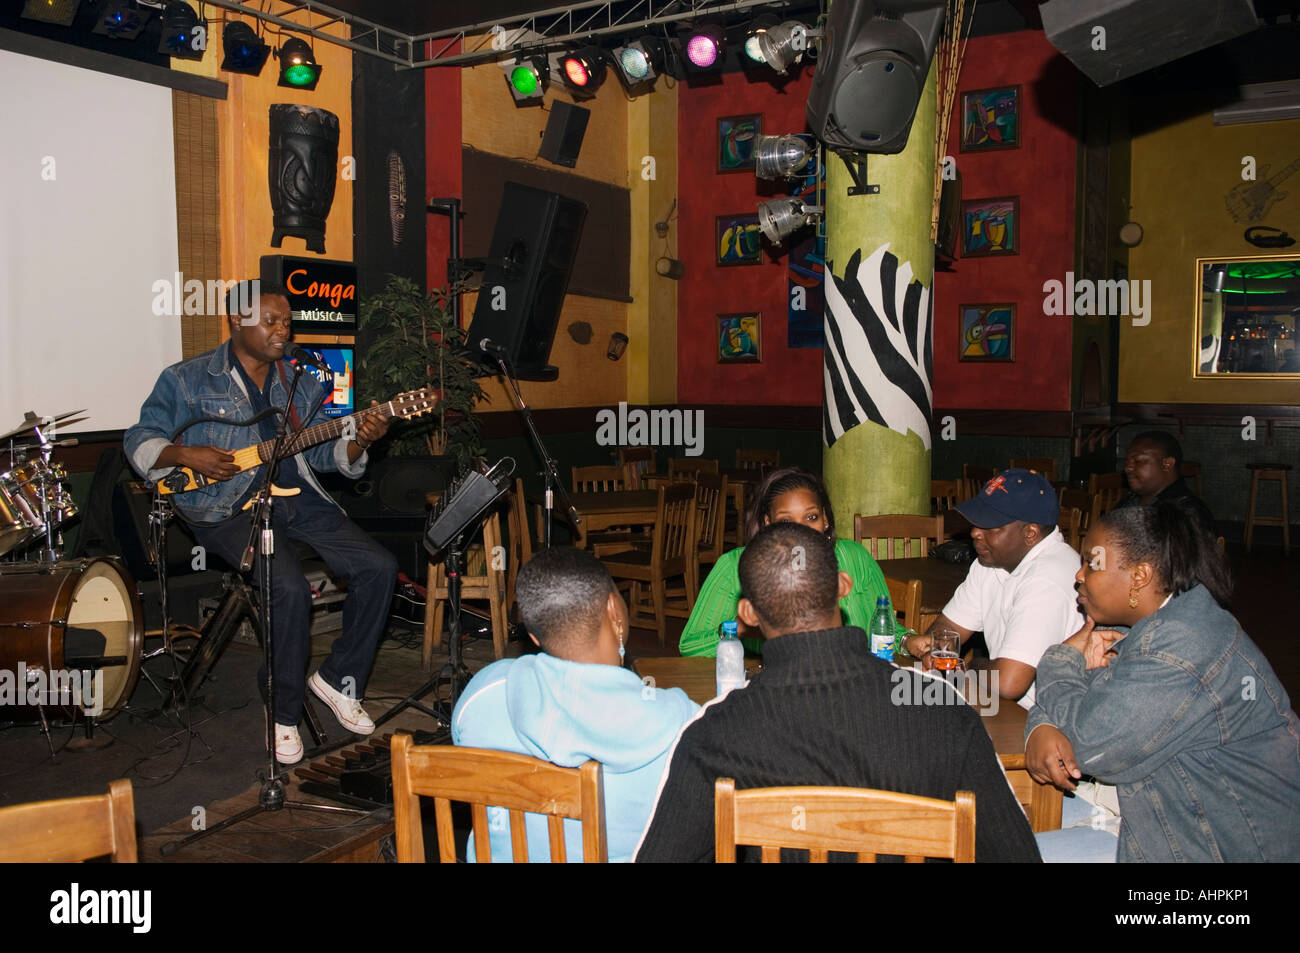 Live music at the Africa bar, Maputo, Mozambique Stock Photo